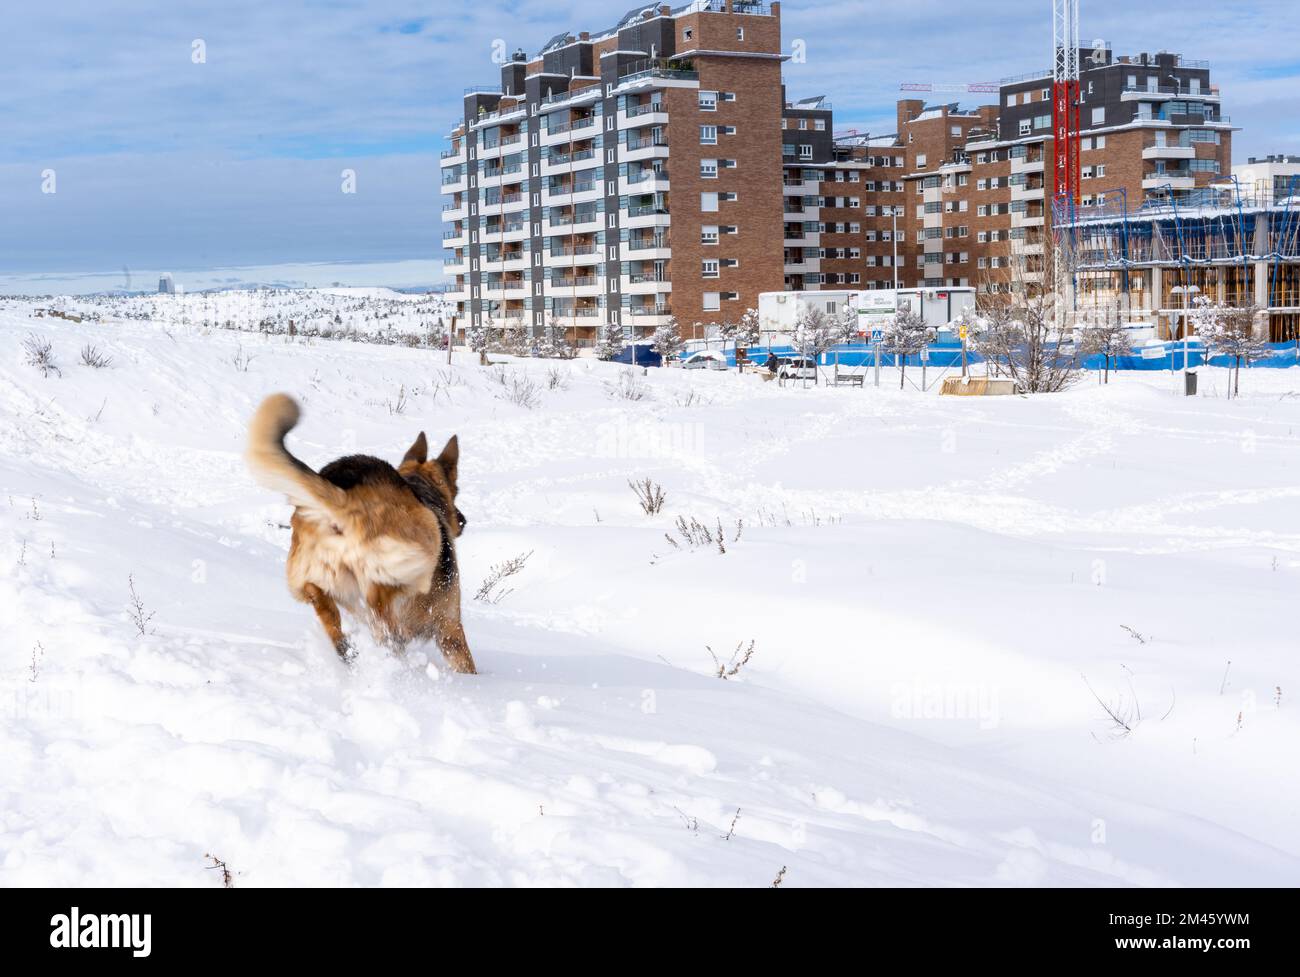 Dog running and enjoying outdoors in the snow in a wintery day. Winter season concept. Stock Photo